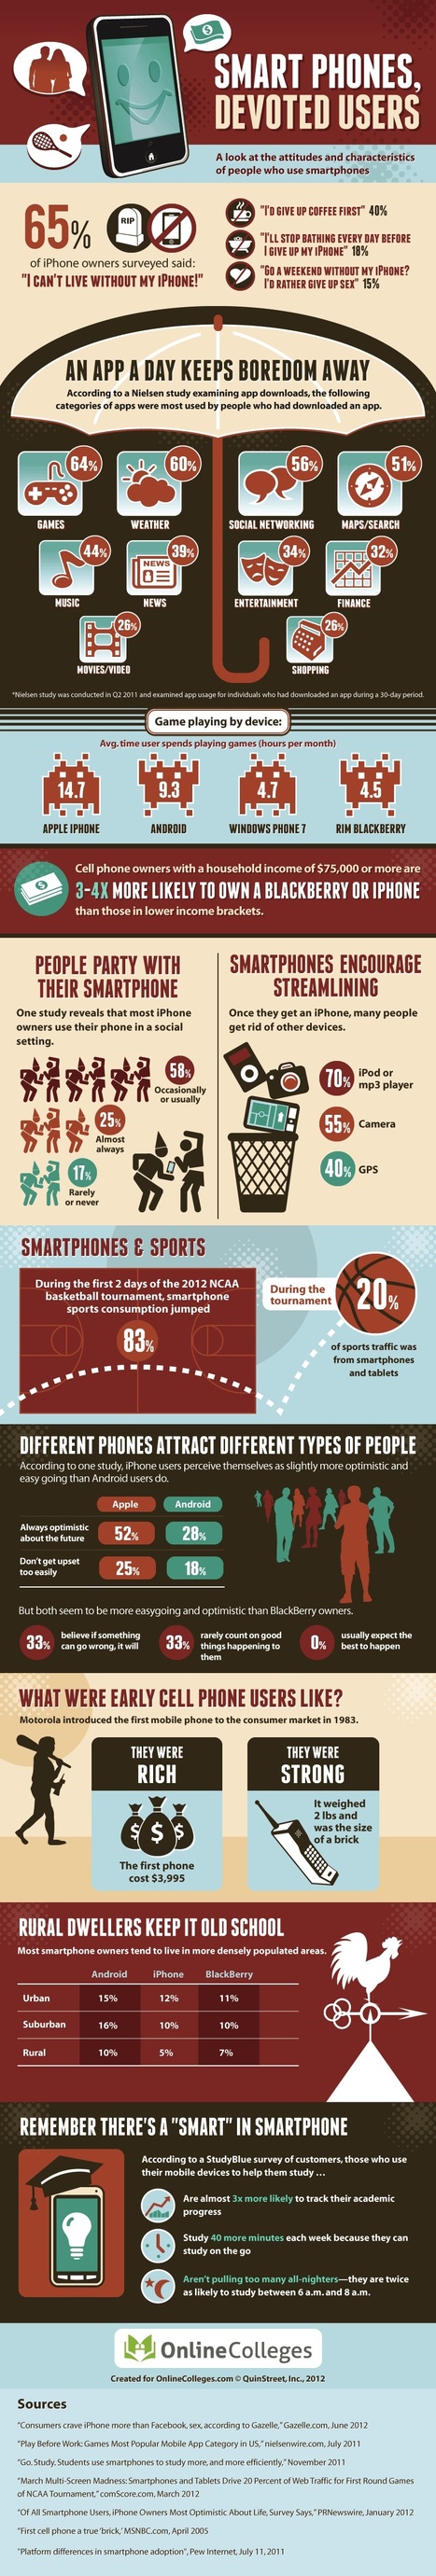 Are You Addicted to Your Smartphone? [INFOGRAPHIC] | 21st Century Learning and Teaching | Scoop.it